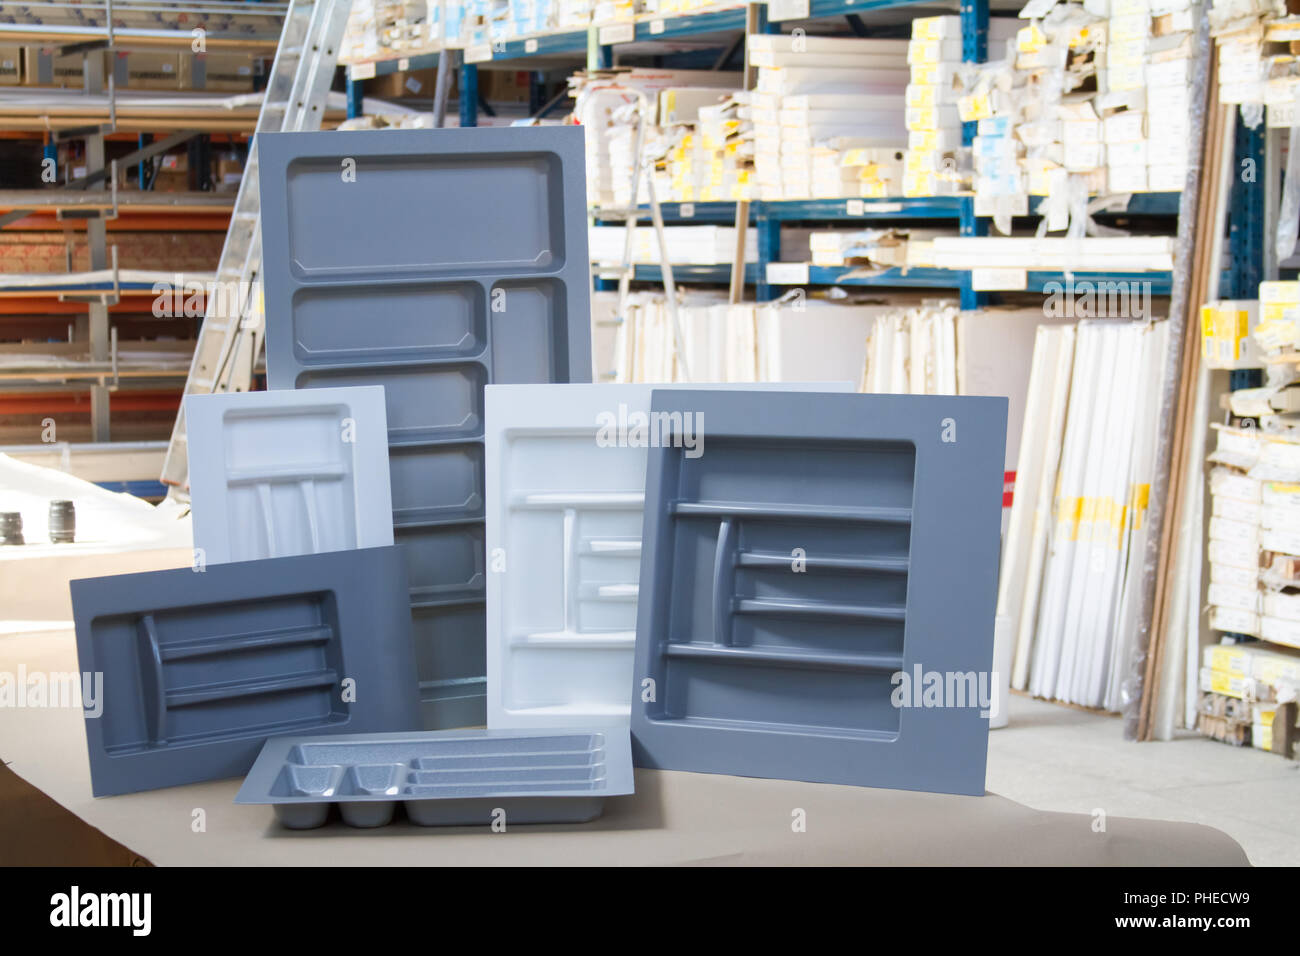 Organizer for utensils. Shelf for plates. Bar shelf for wine glasses to the kitchen. Furniture accessories. Built in equipment. Stock Photo